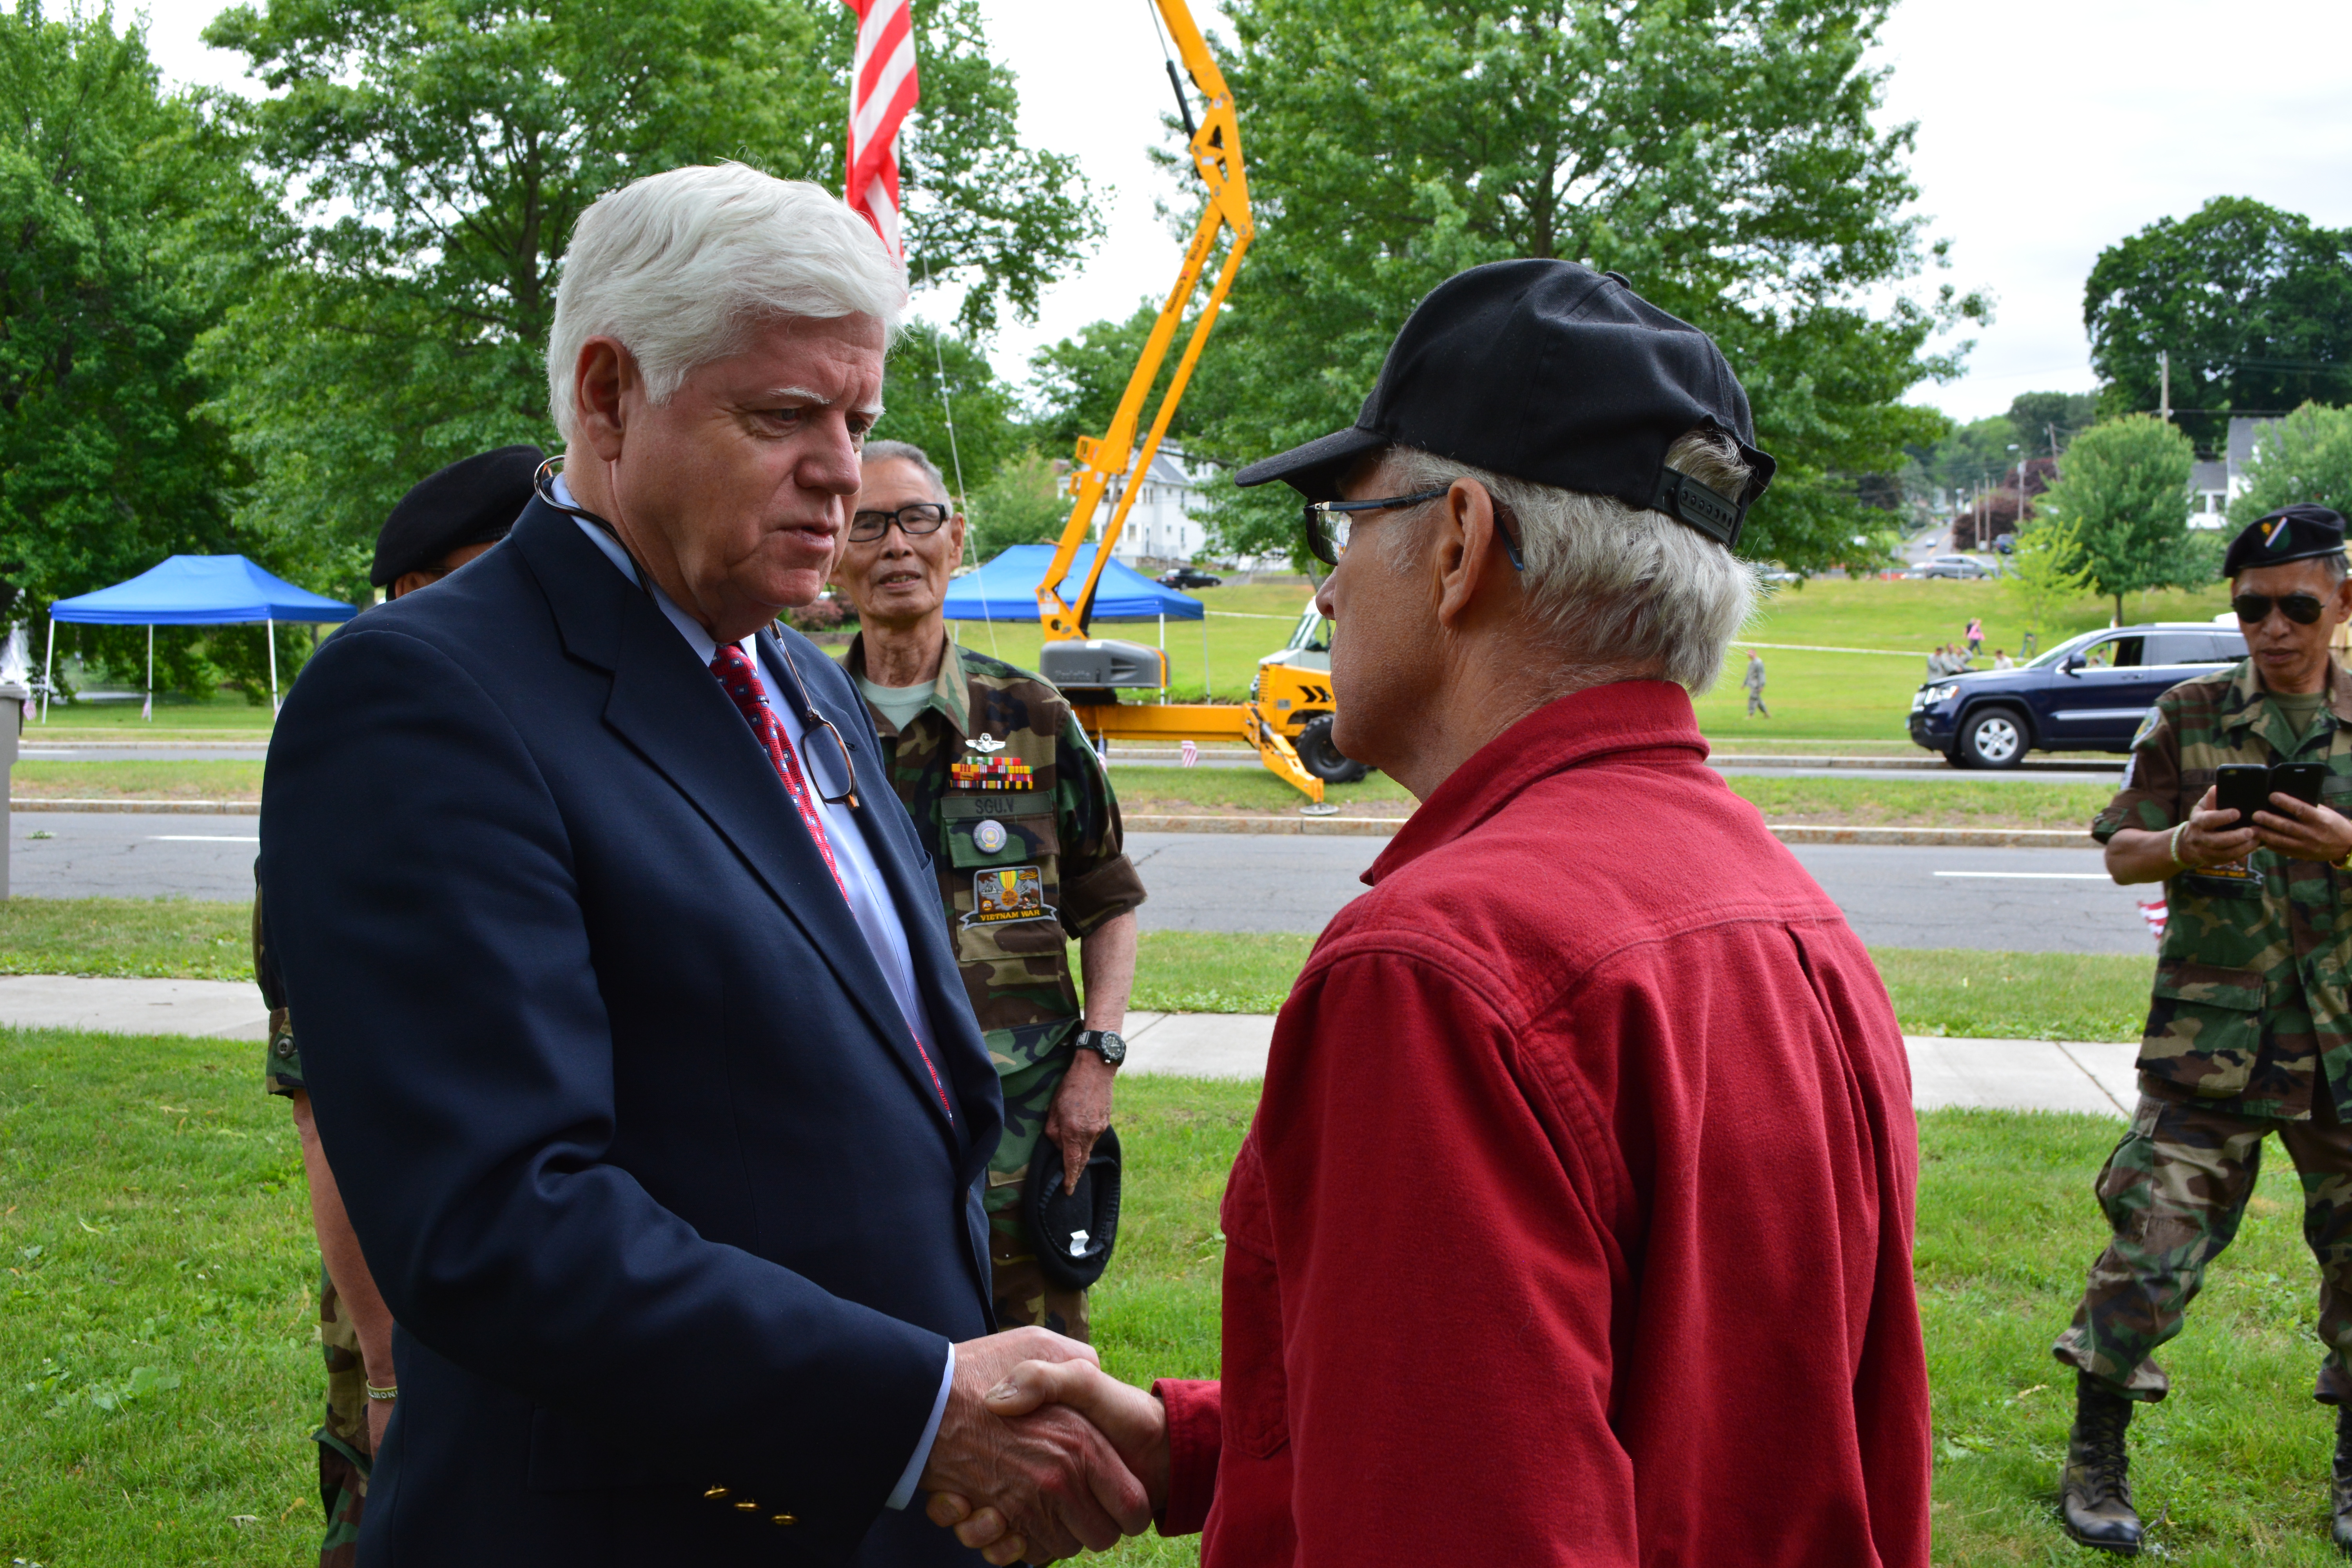 Rep. Larson shakes hands with a veteran in Bristol